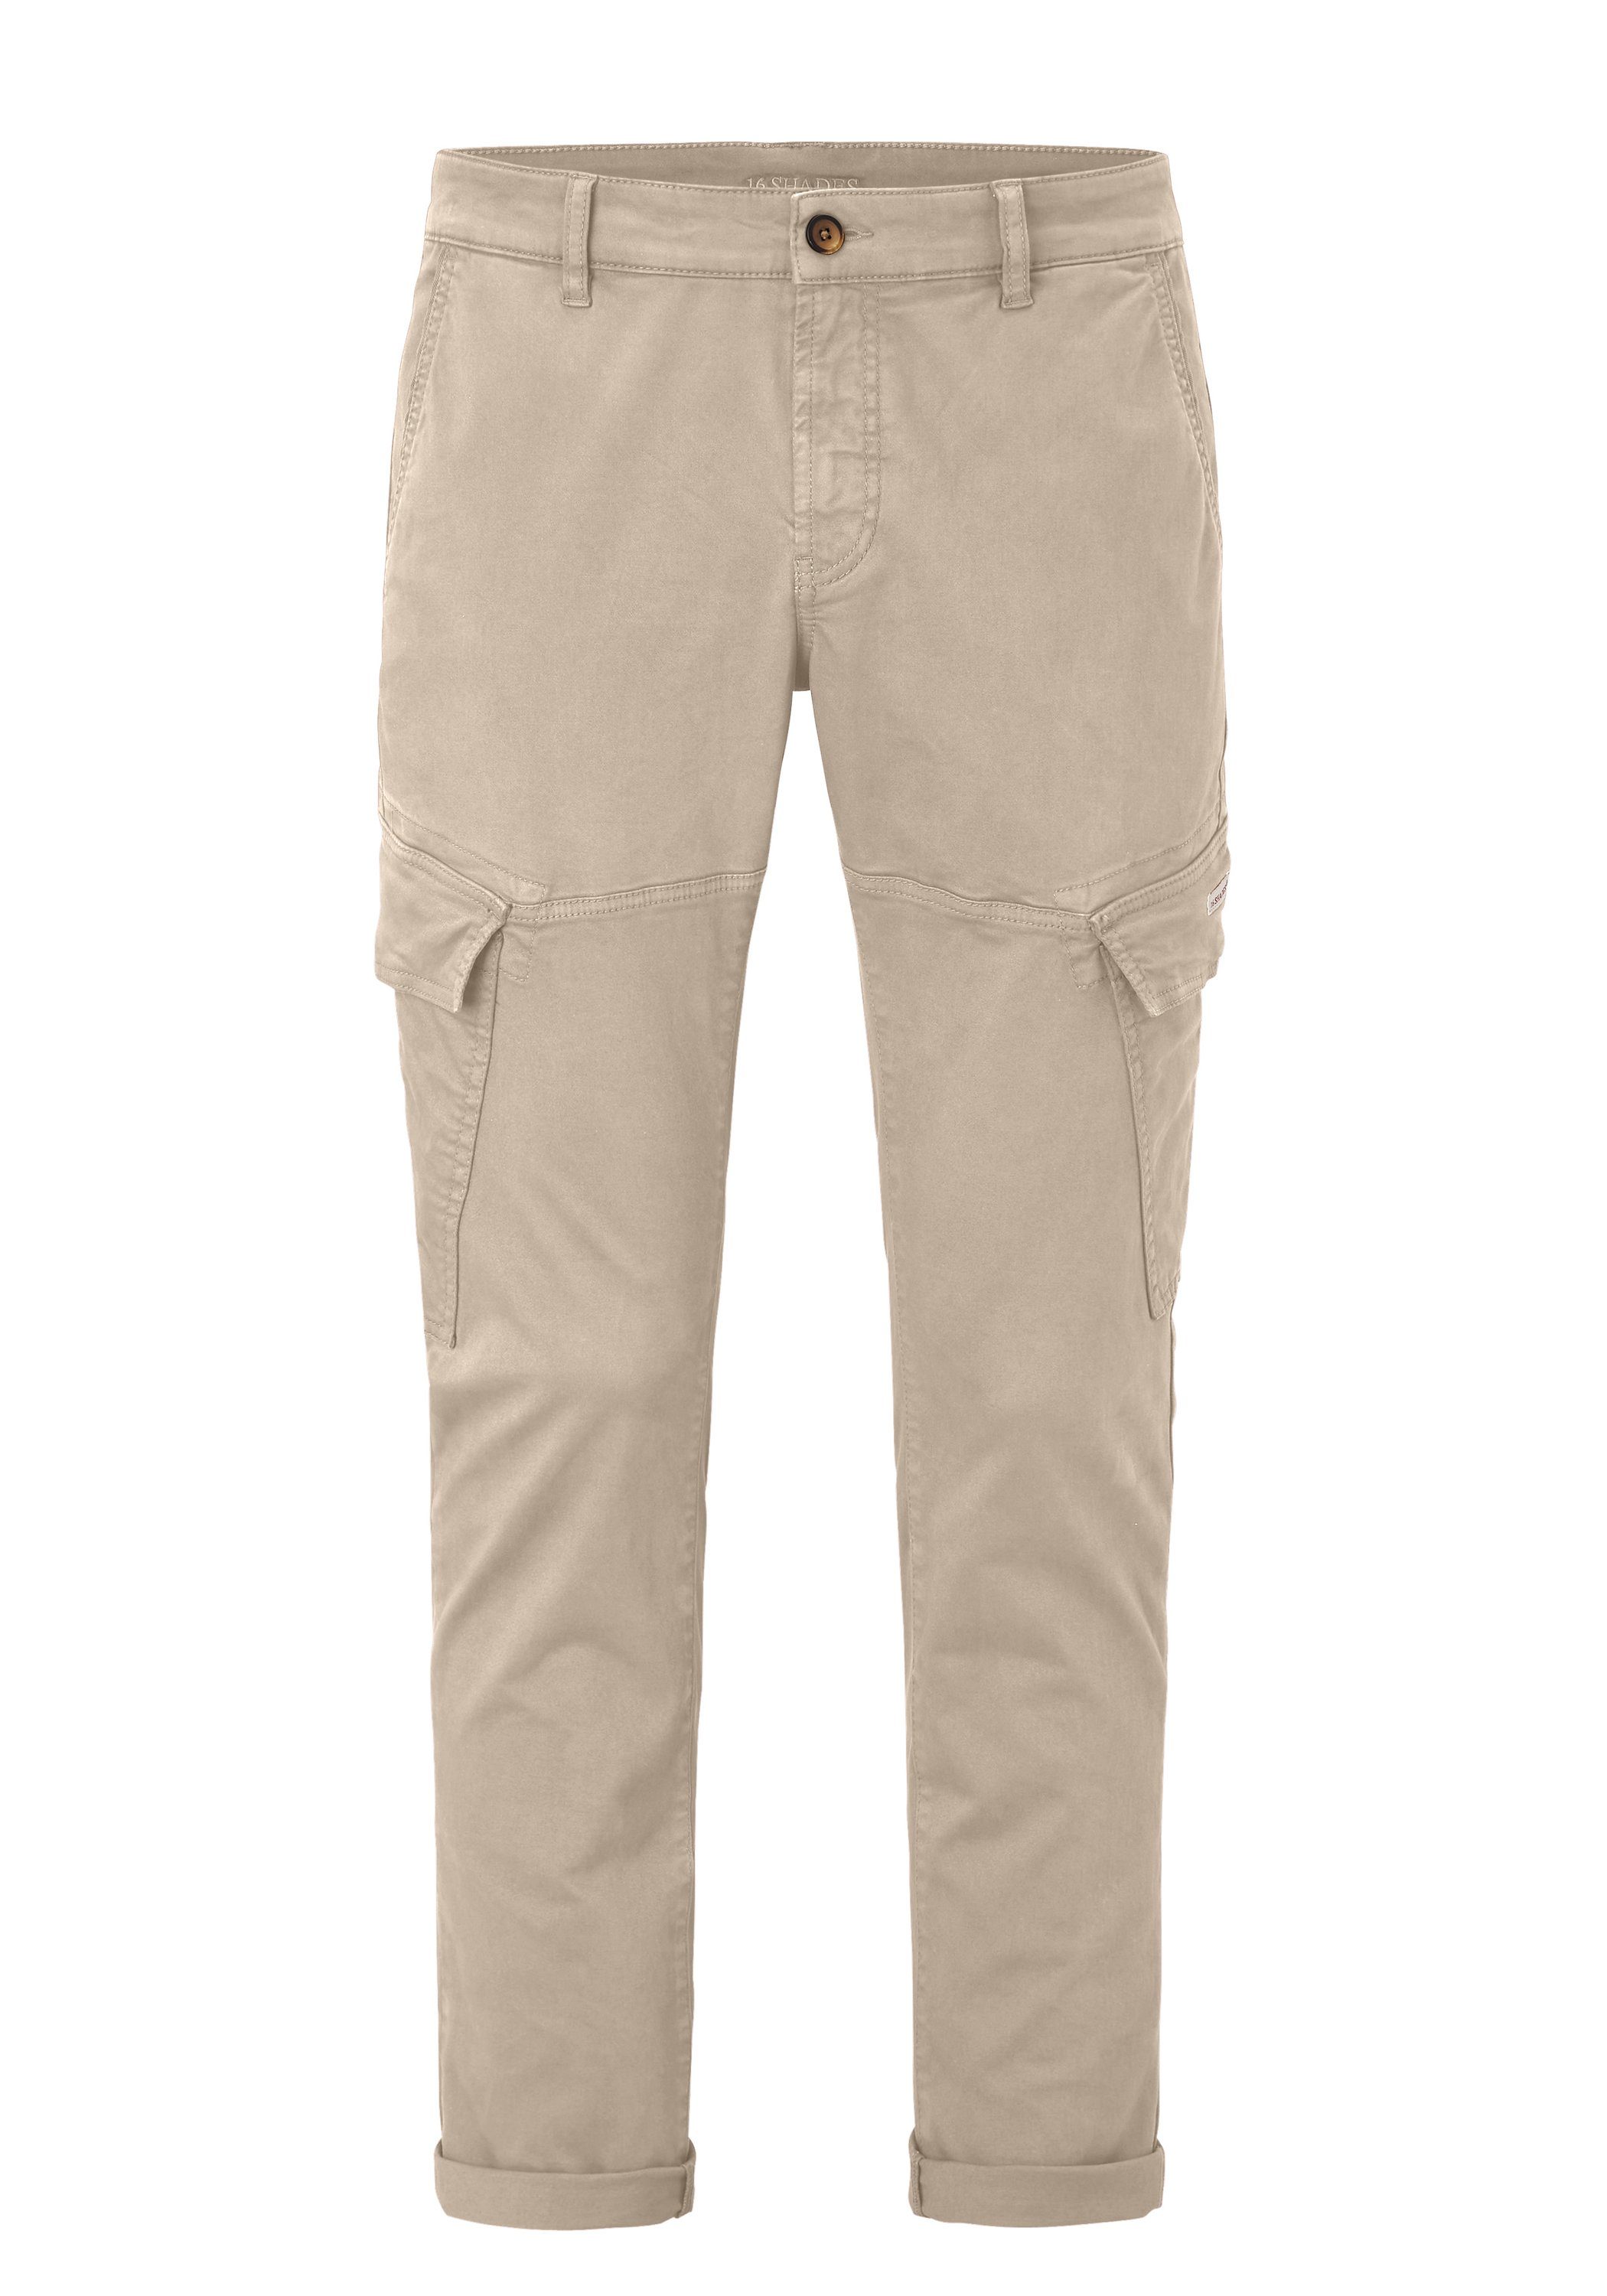 Redpoint Shades Kingston 16 Cargohose Fit Edition beige Chinohose- Tapered